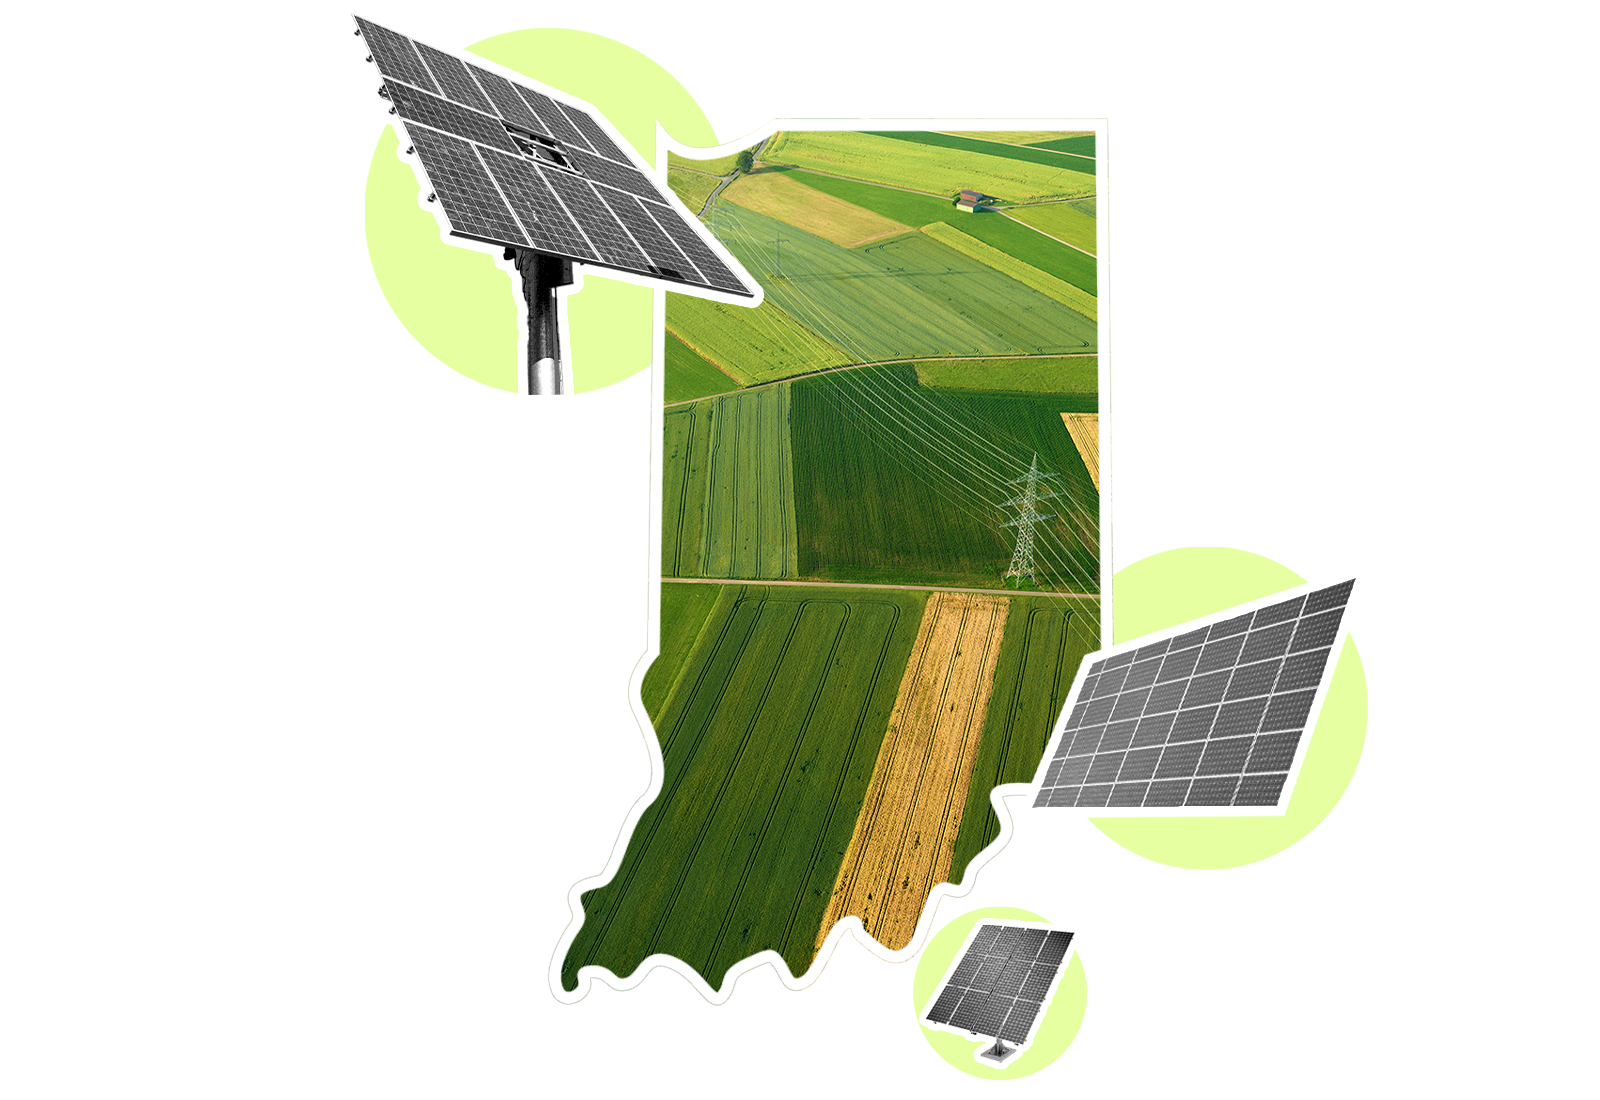 The country’s biggest solar farm is coming to one of the coal-friendliest states thumbnail